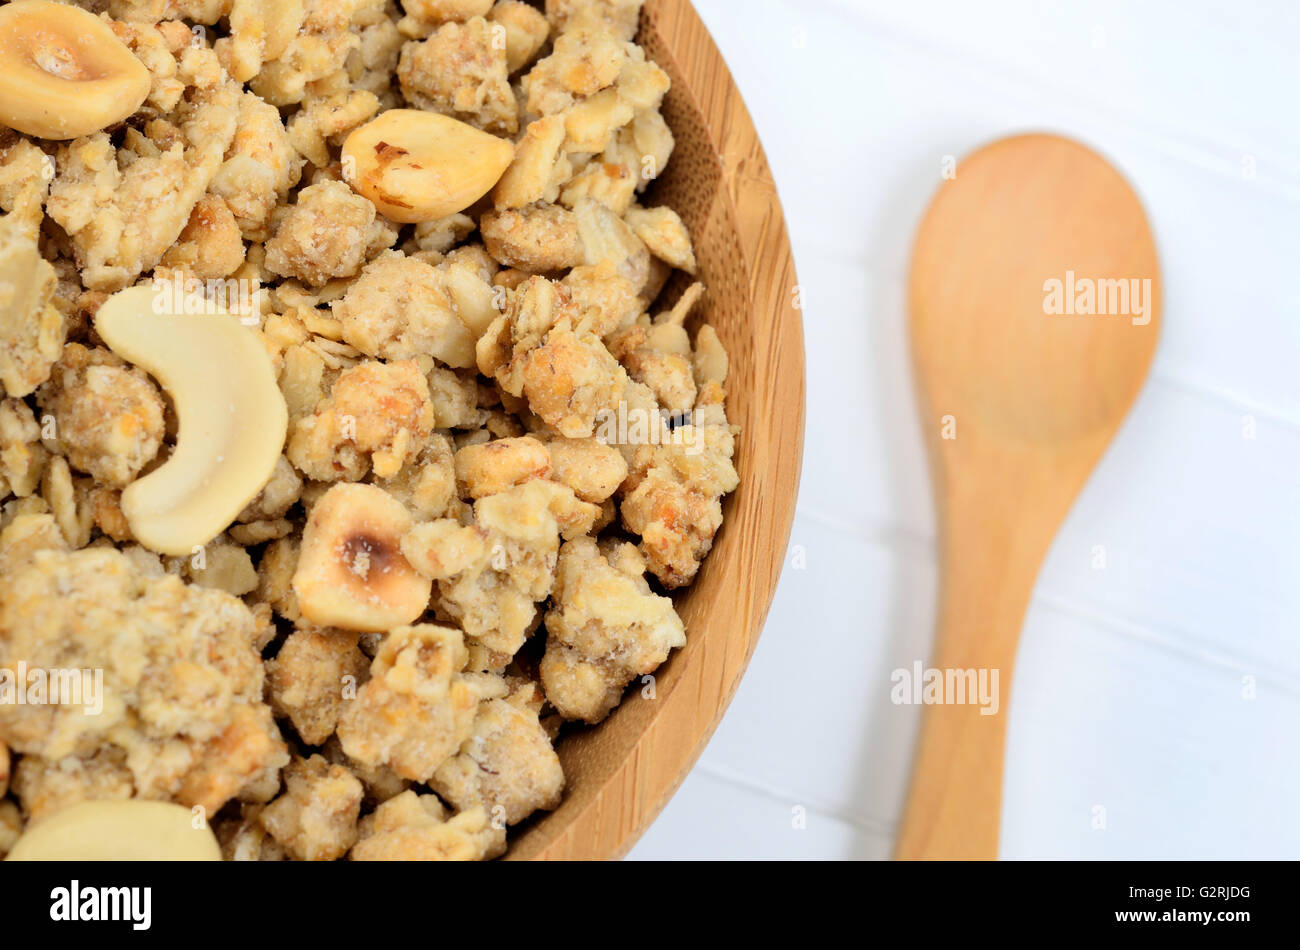 Muesli in bamboo bowl with wooden spoon on table Stock Photo